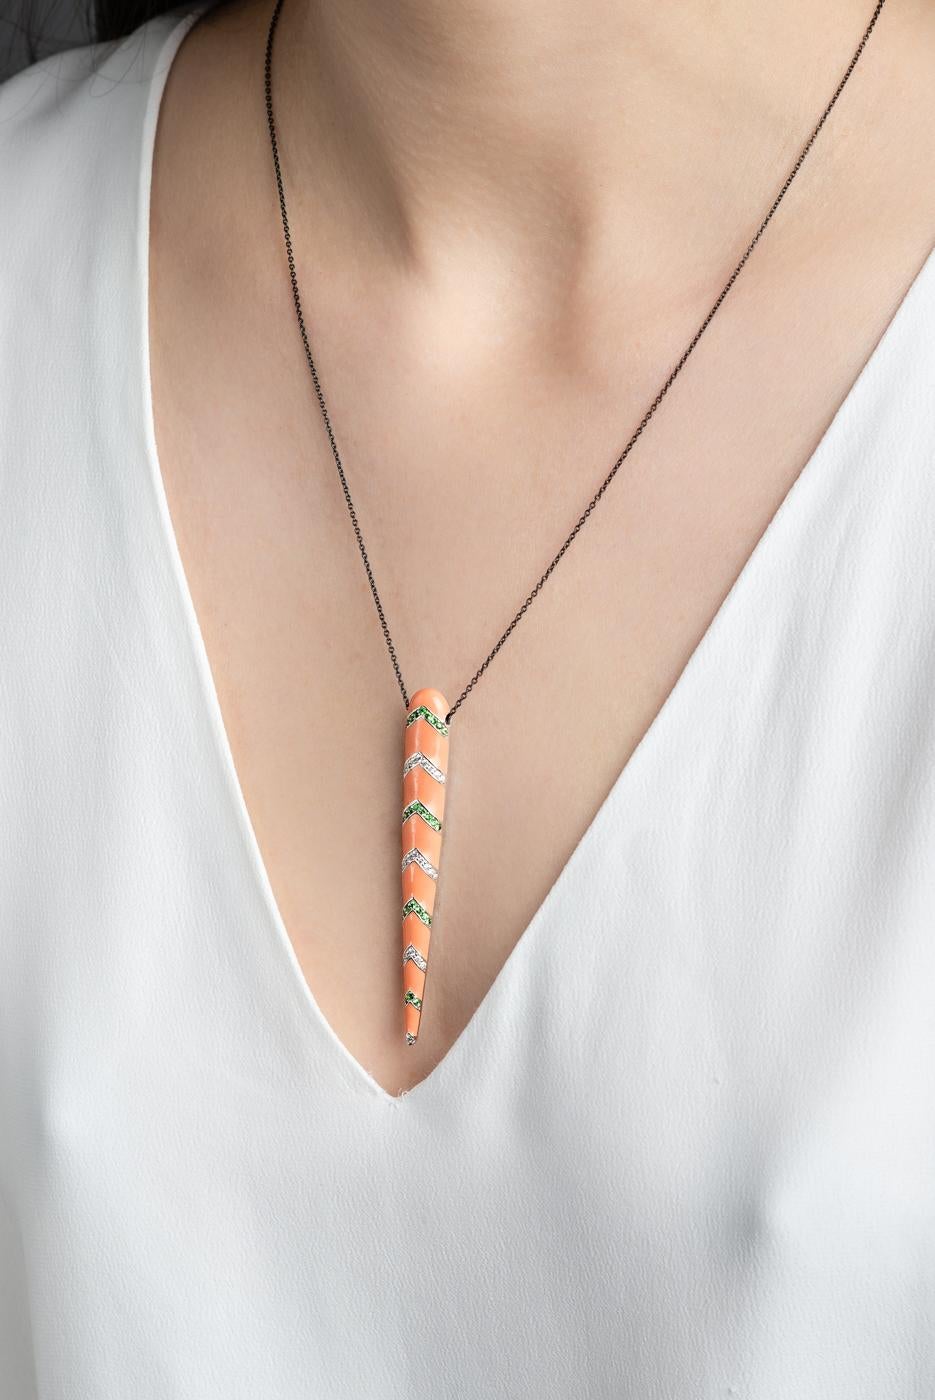 Featured From Nikos Koulis's Spectrum Collection, pendant with 0,25 carats of white diamonds, 0,26 cts of tsavorites, orange enamel & black rhodium. Part of his Spectrum collection, inspired by the prism of light, rays of the Mediterrenean sun, this